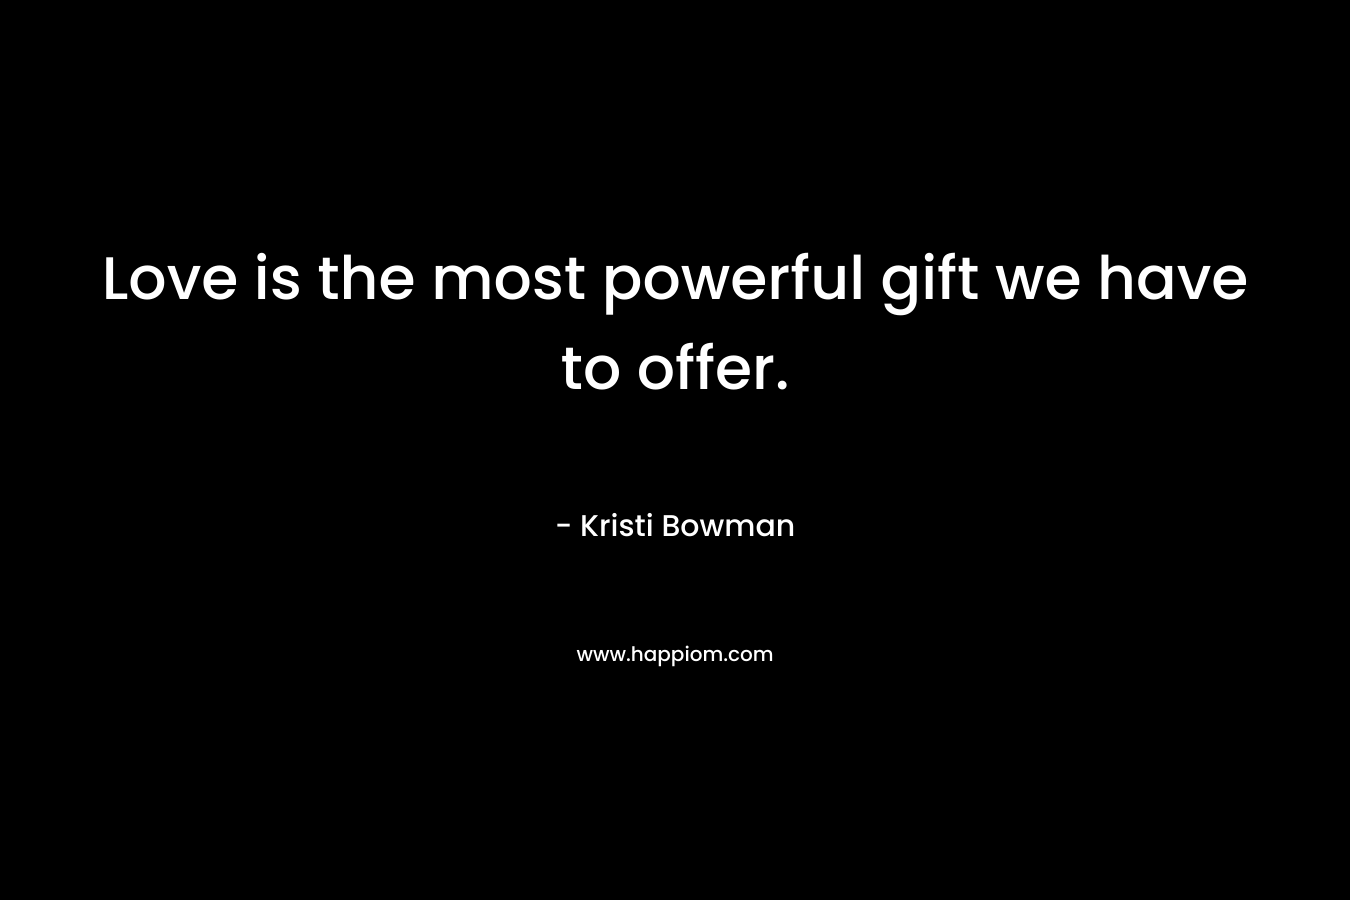 Love is the most powerful gift we have to offer.